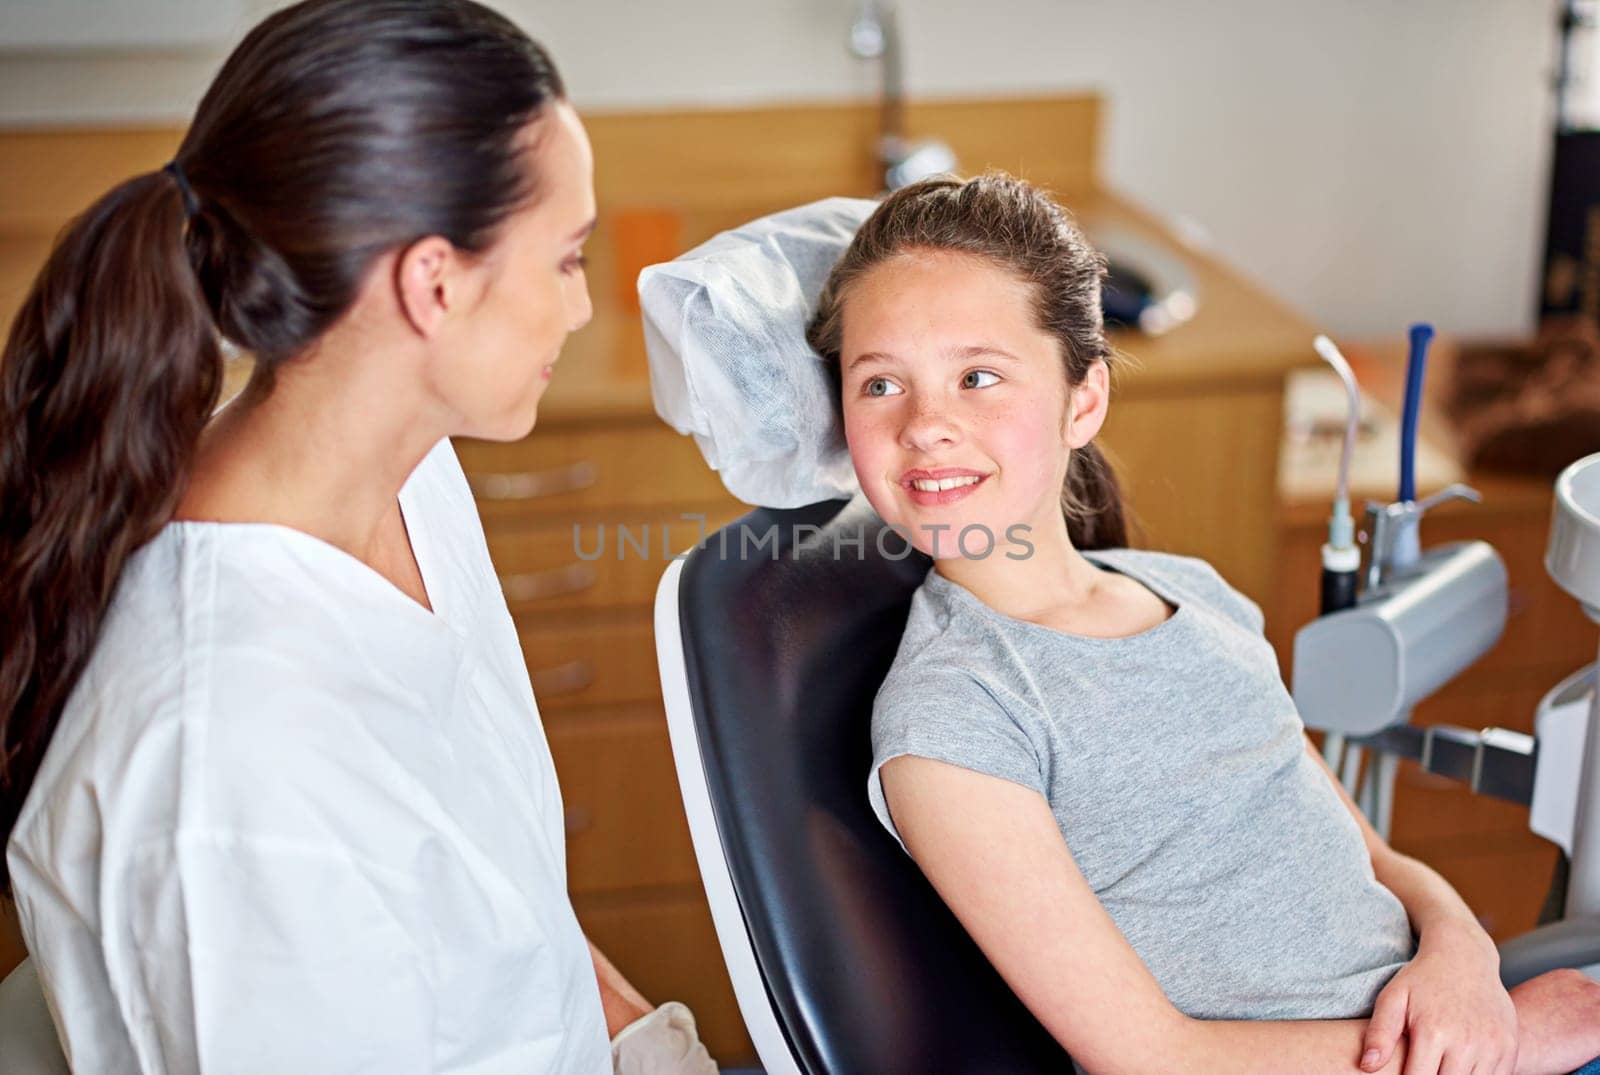 Dentist, child and oral hygiene consultation with conversation and talk for dental care. Clinic, smile and young girl with healthcare and wellness advice for mouth and teeth health at appointment.